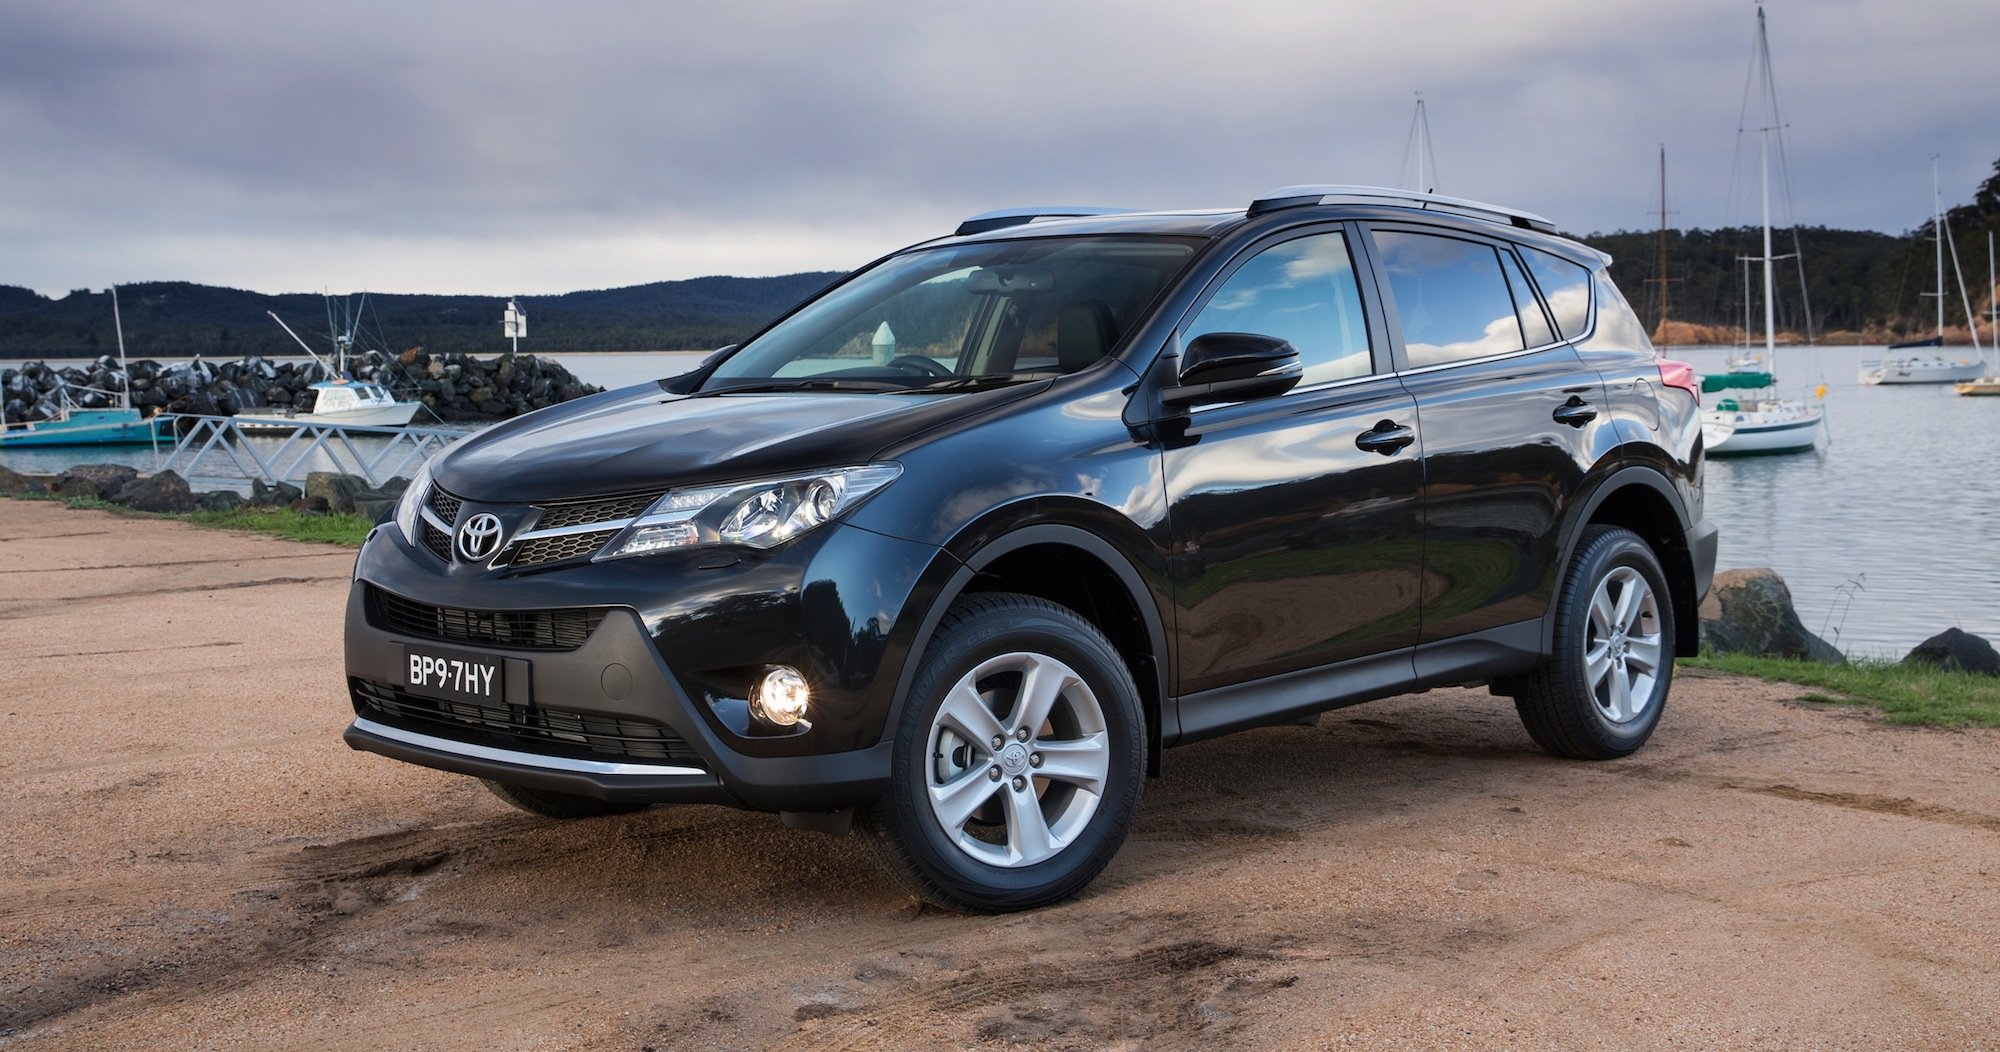 2014 Toyota RAV4  prices up, equipment added, manual models deleted